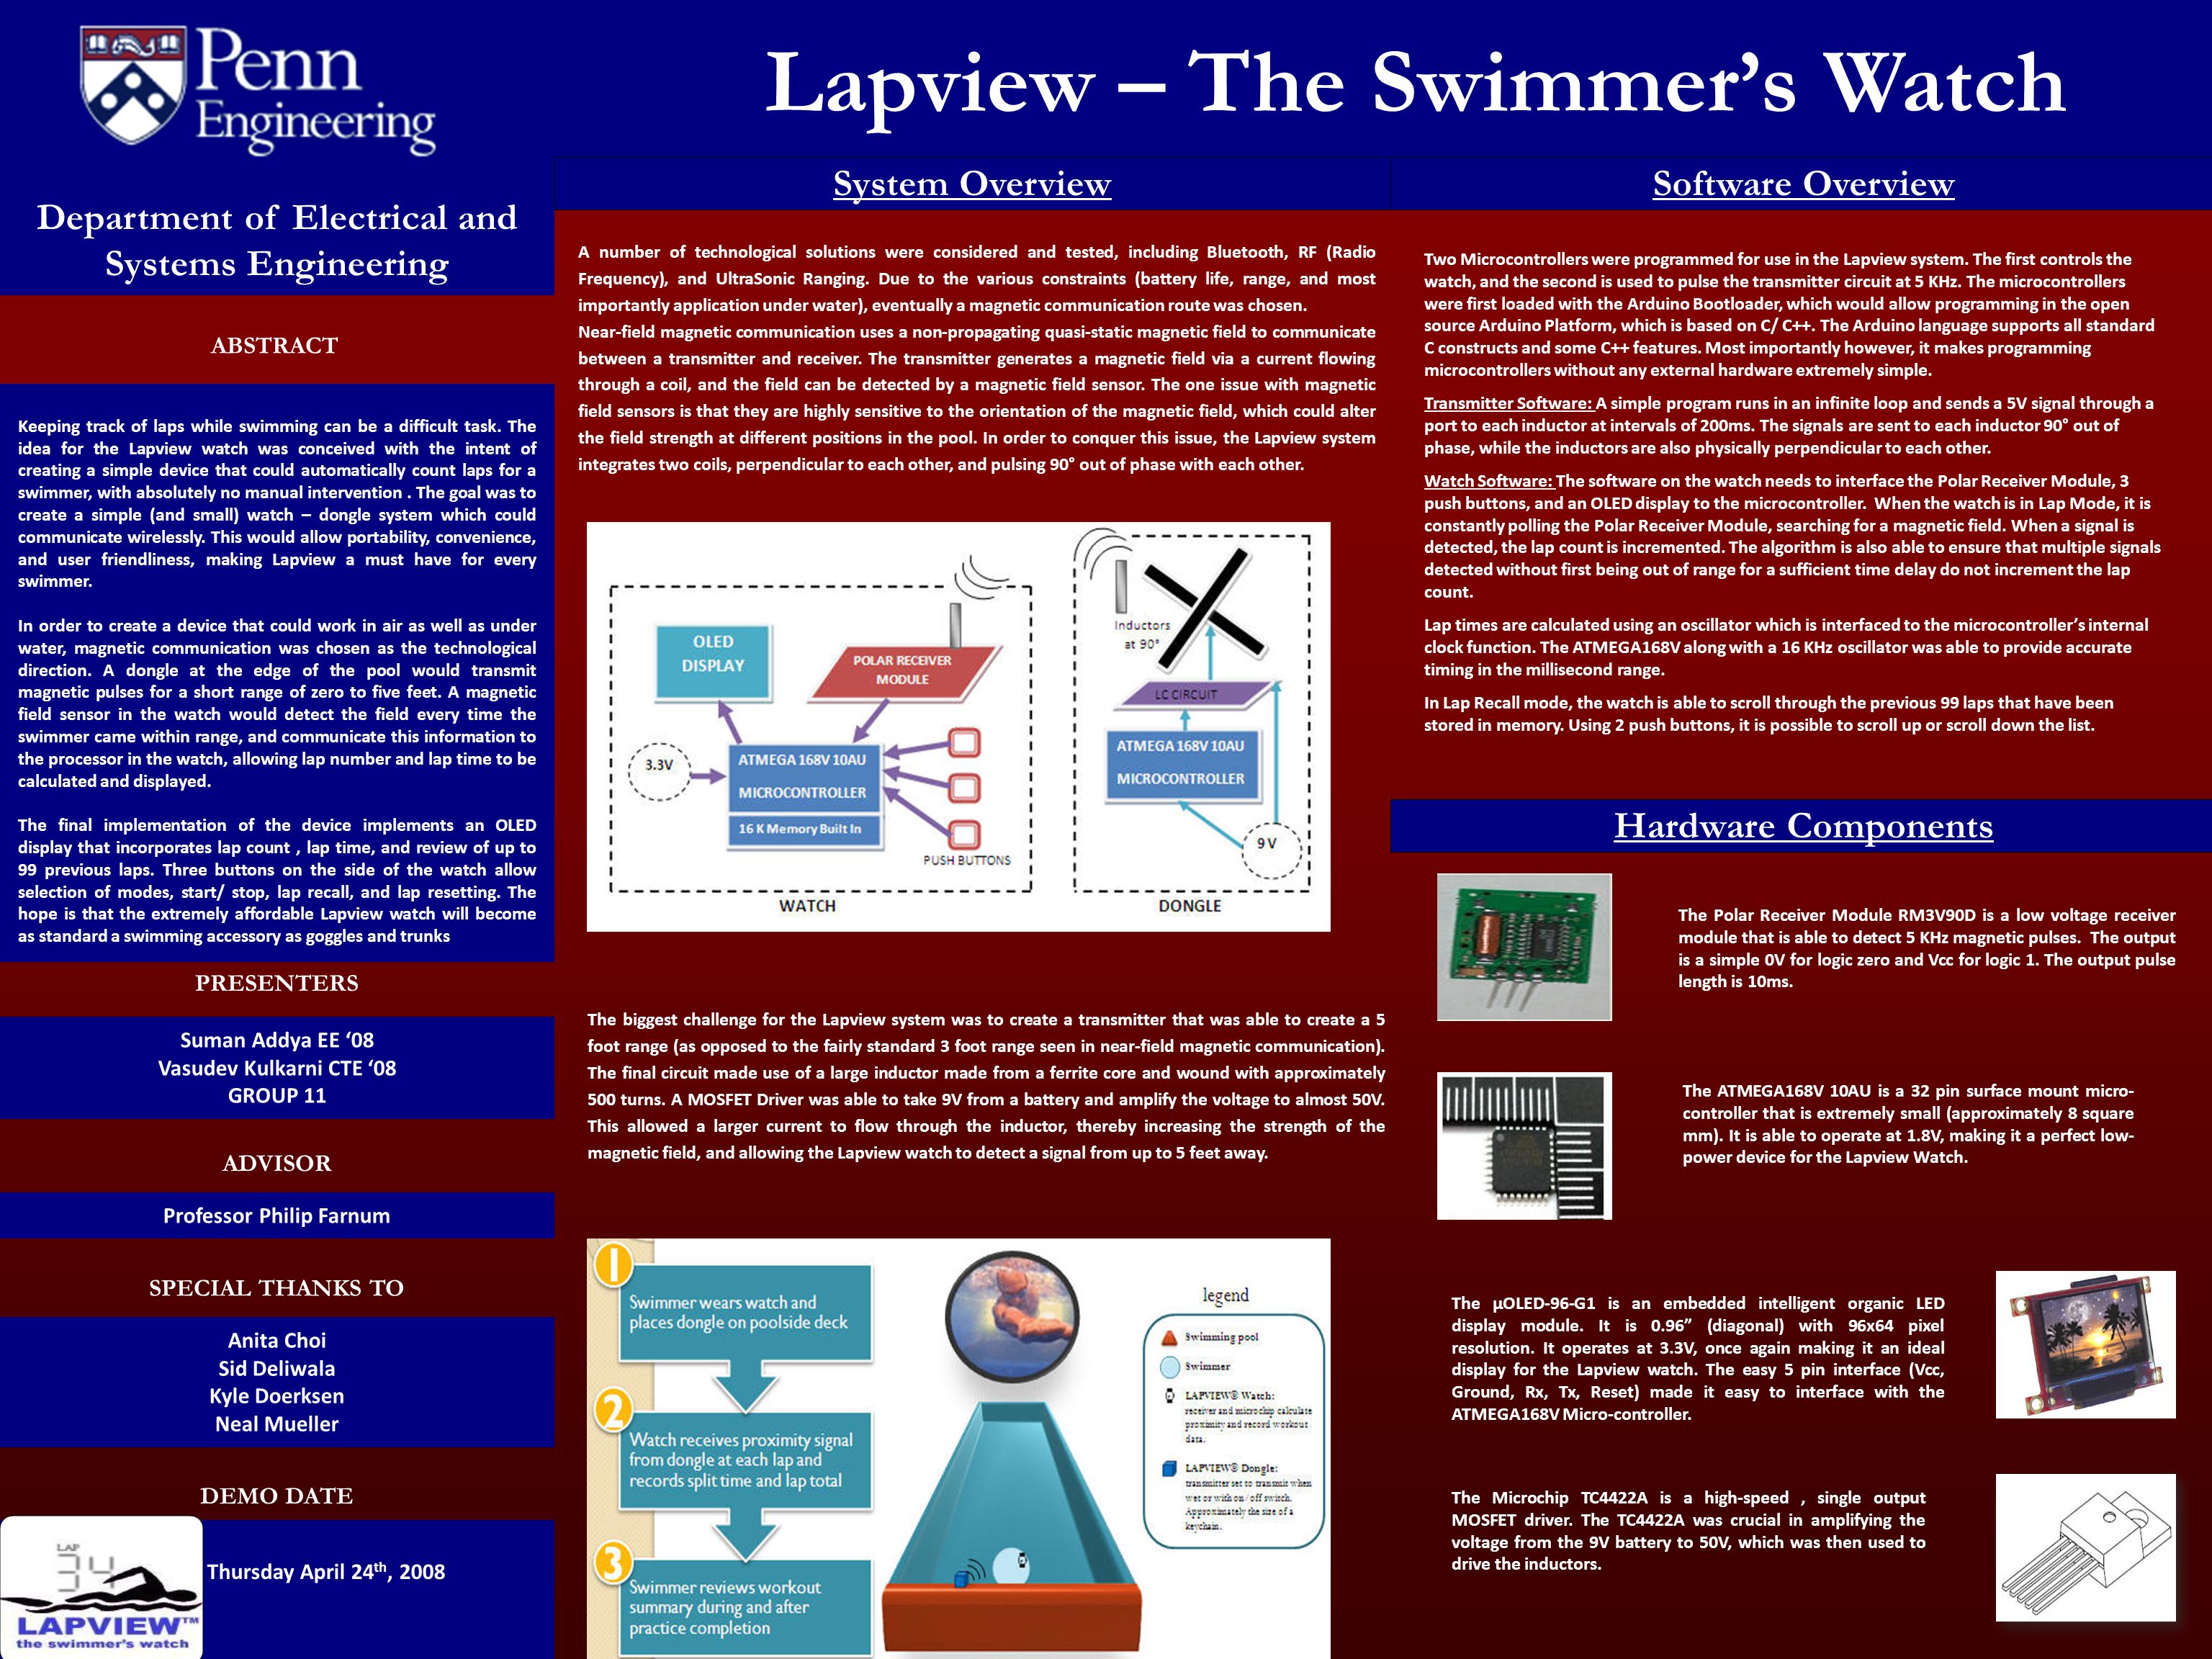 Lapview – The Swimmer’s Watch GROUP 9 PRESENTERS DEMO DATE SPECIAL THANKS TO ADVISOR PRESENTERS Thursday April 24 th, 2008 Department of Electrical and Systems Engineering ABSTRACT Keeping track of laps while swimming can be a difficult task.